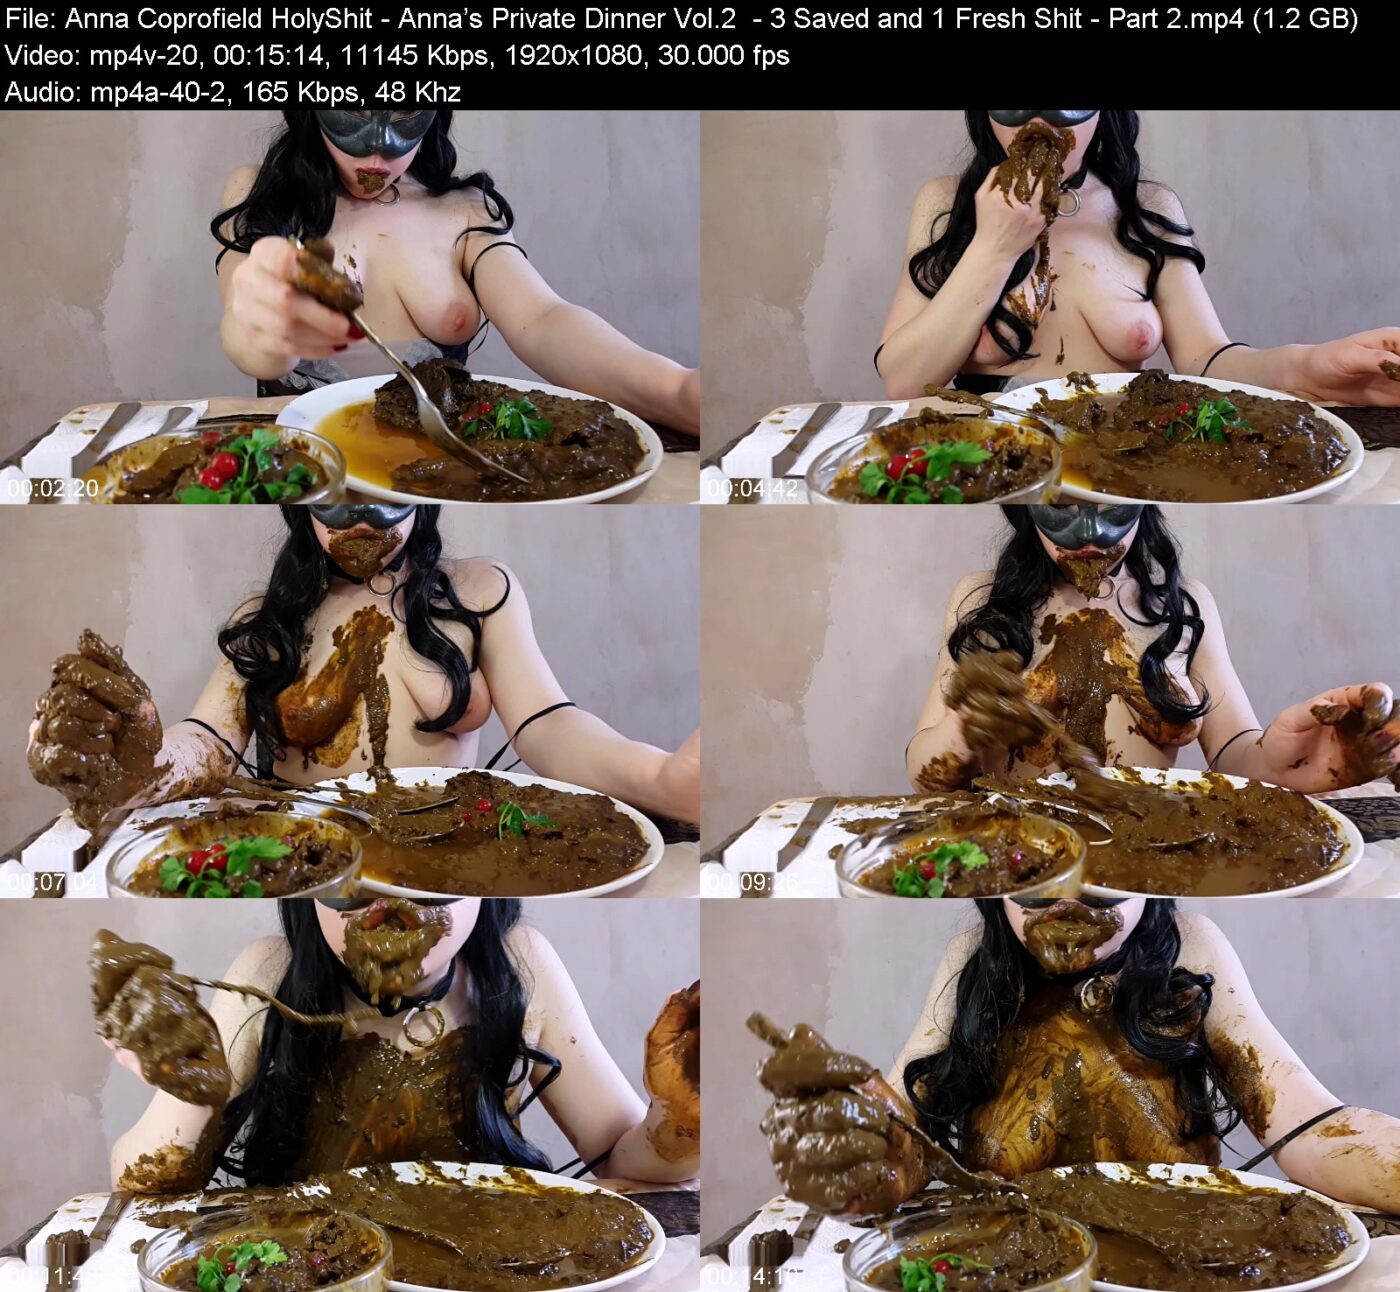 Anna Coprofield HolyShit in Anna's Private Dinner Vol.2  in 3 Saved & 1 Fresh Shit in Part 2